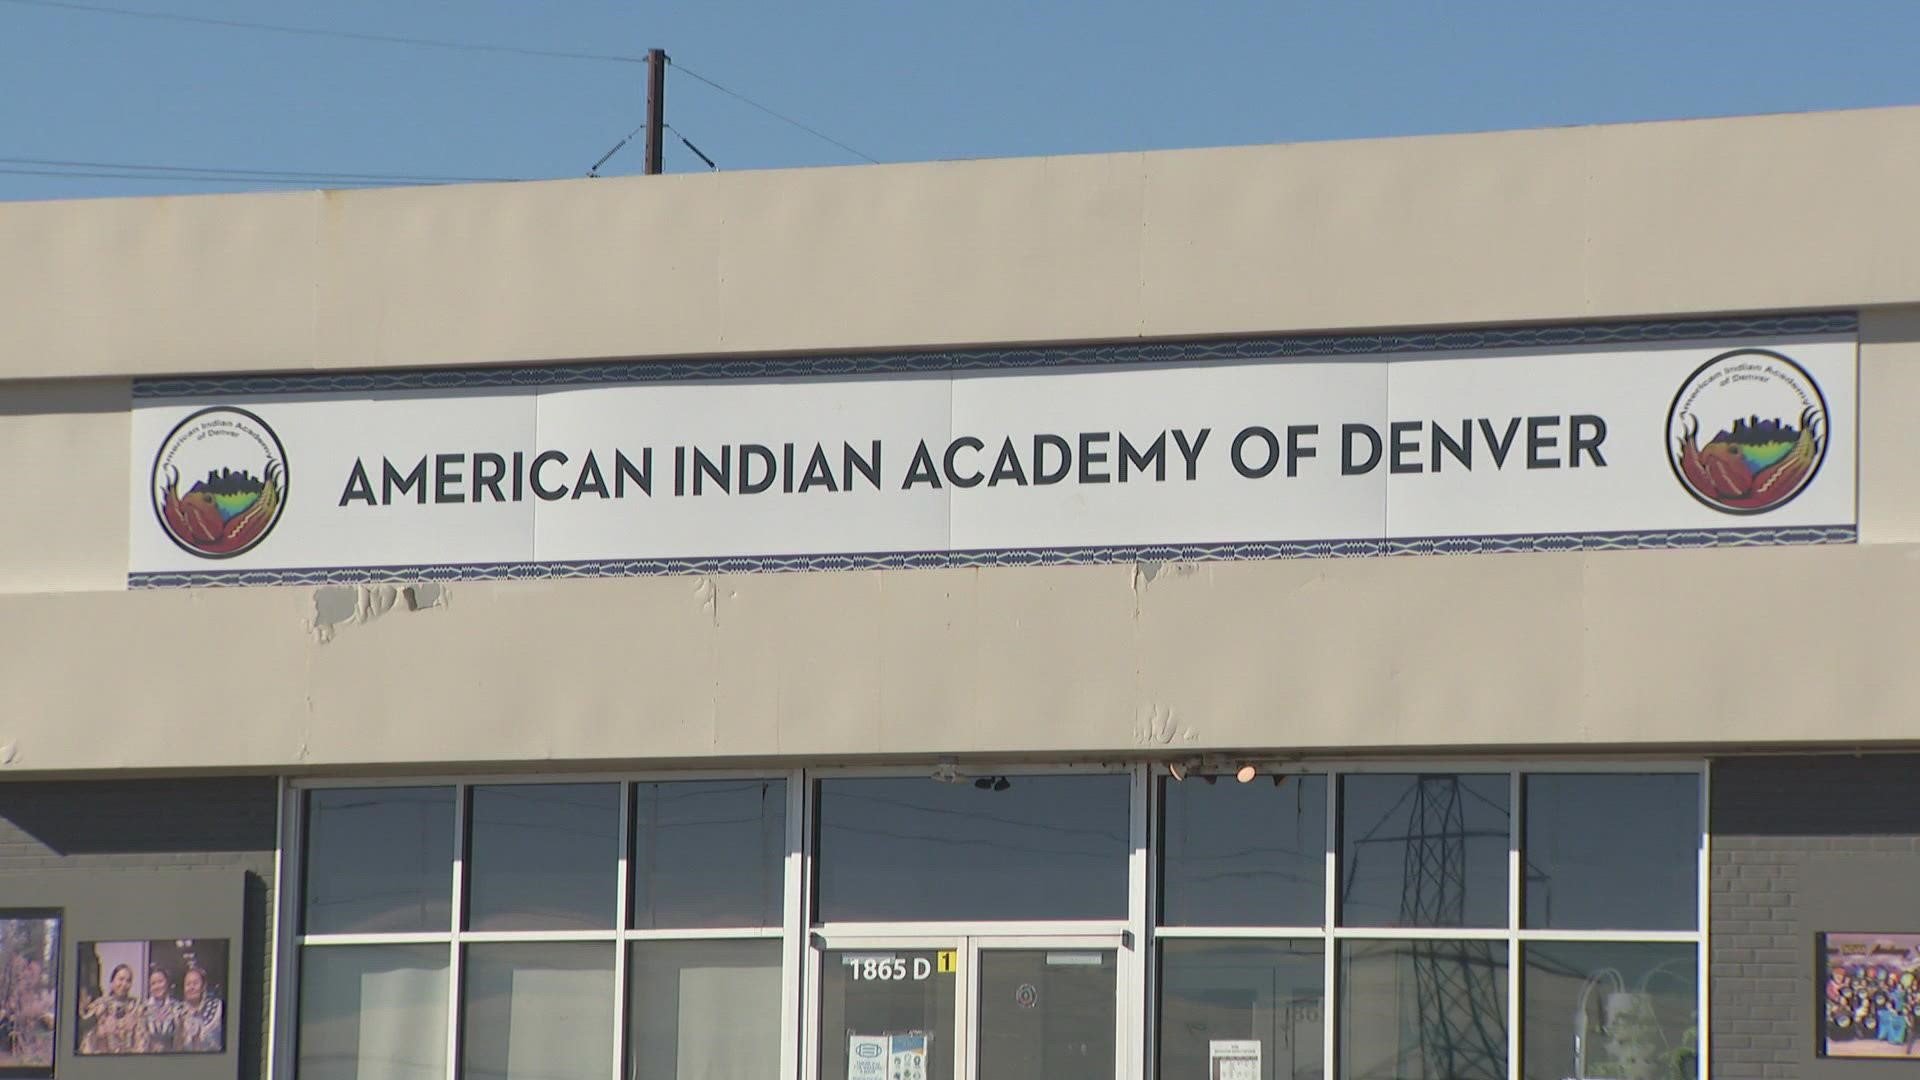 There are questions around the future of a charter school in Denver which focuses on indigenous education.